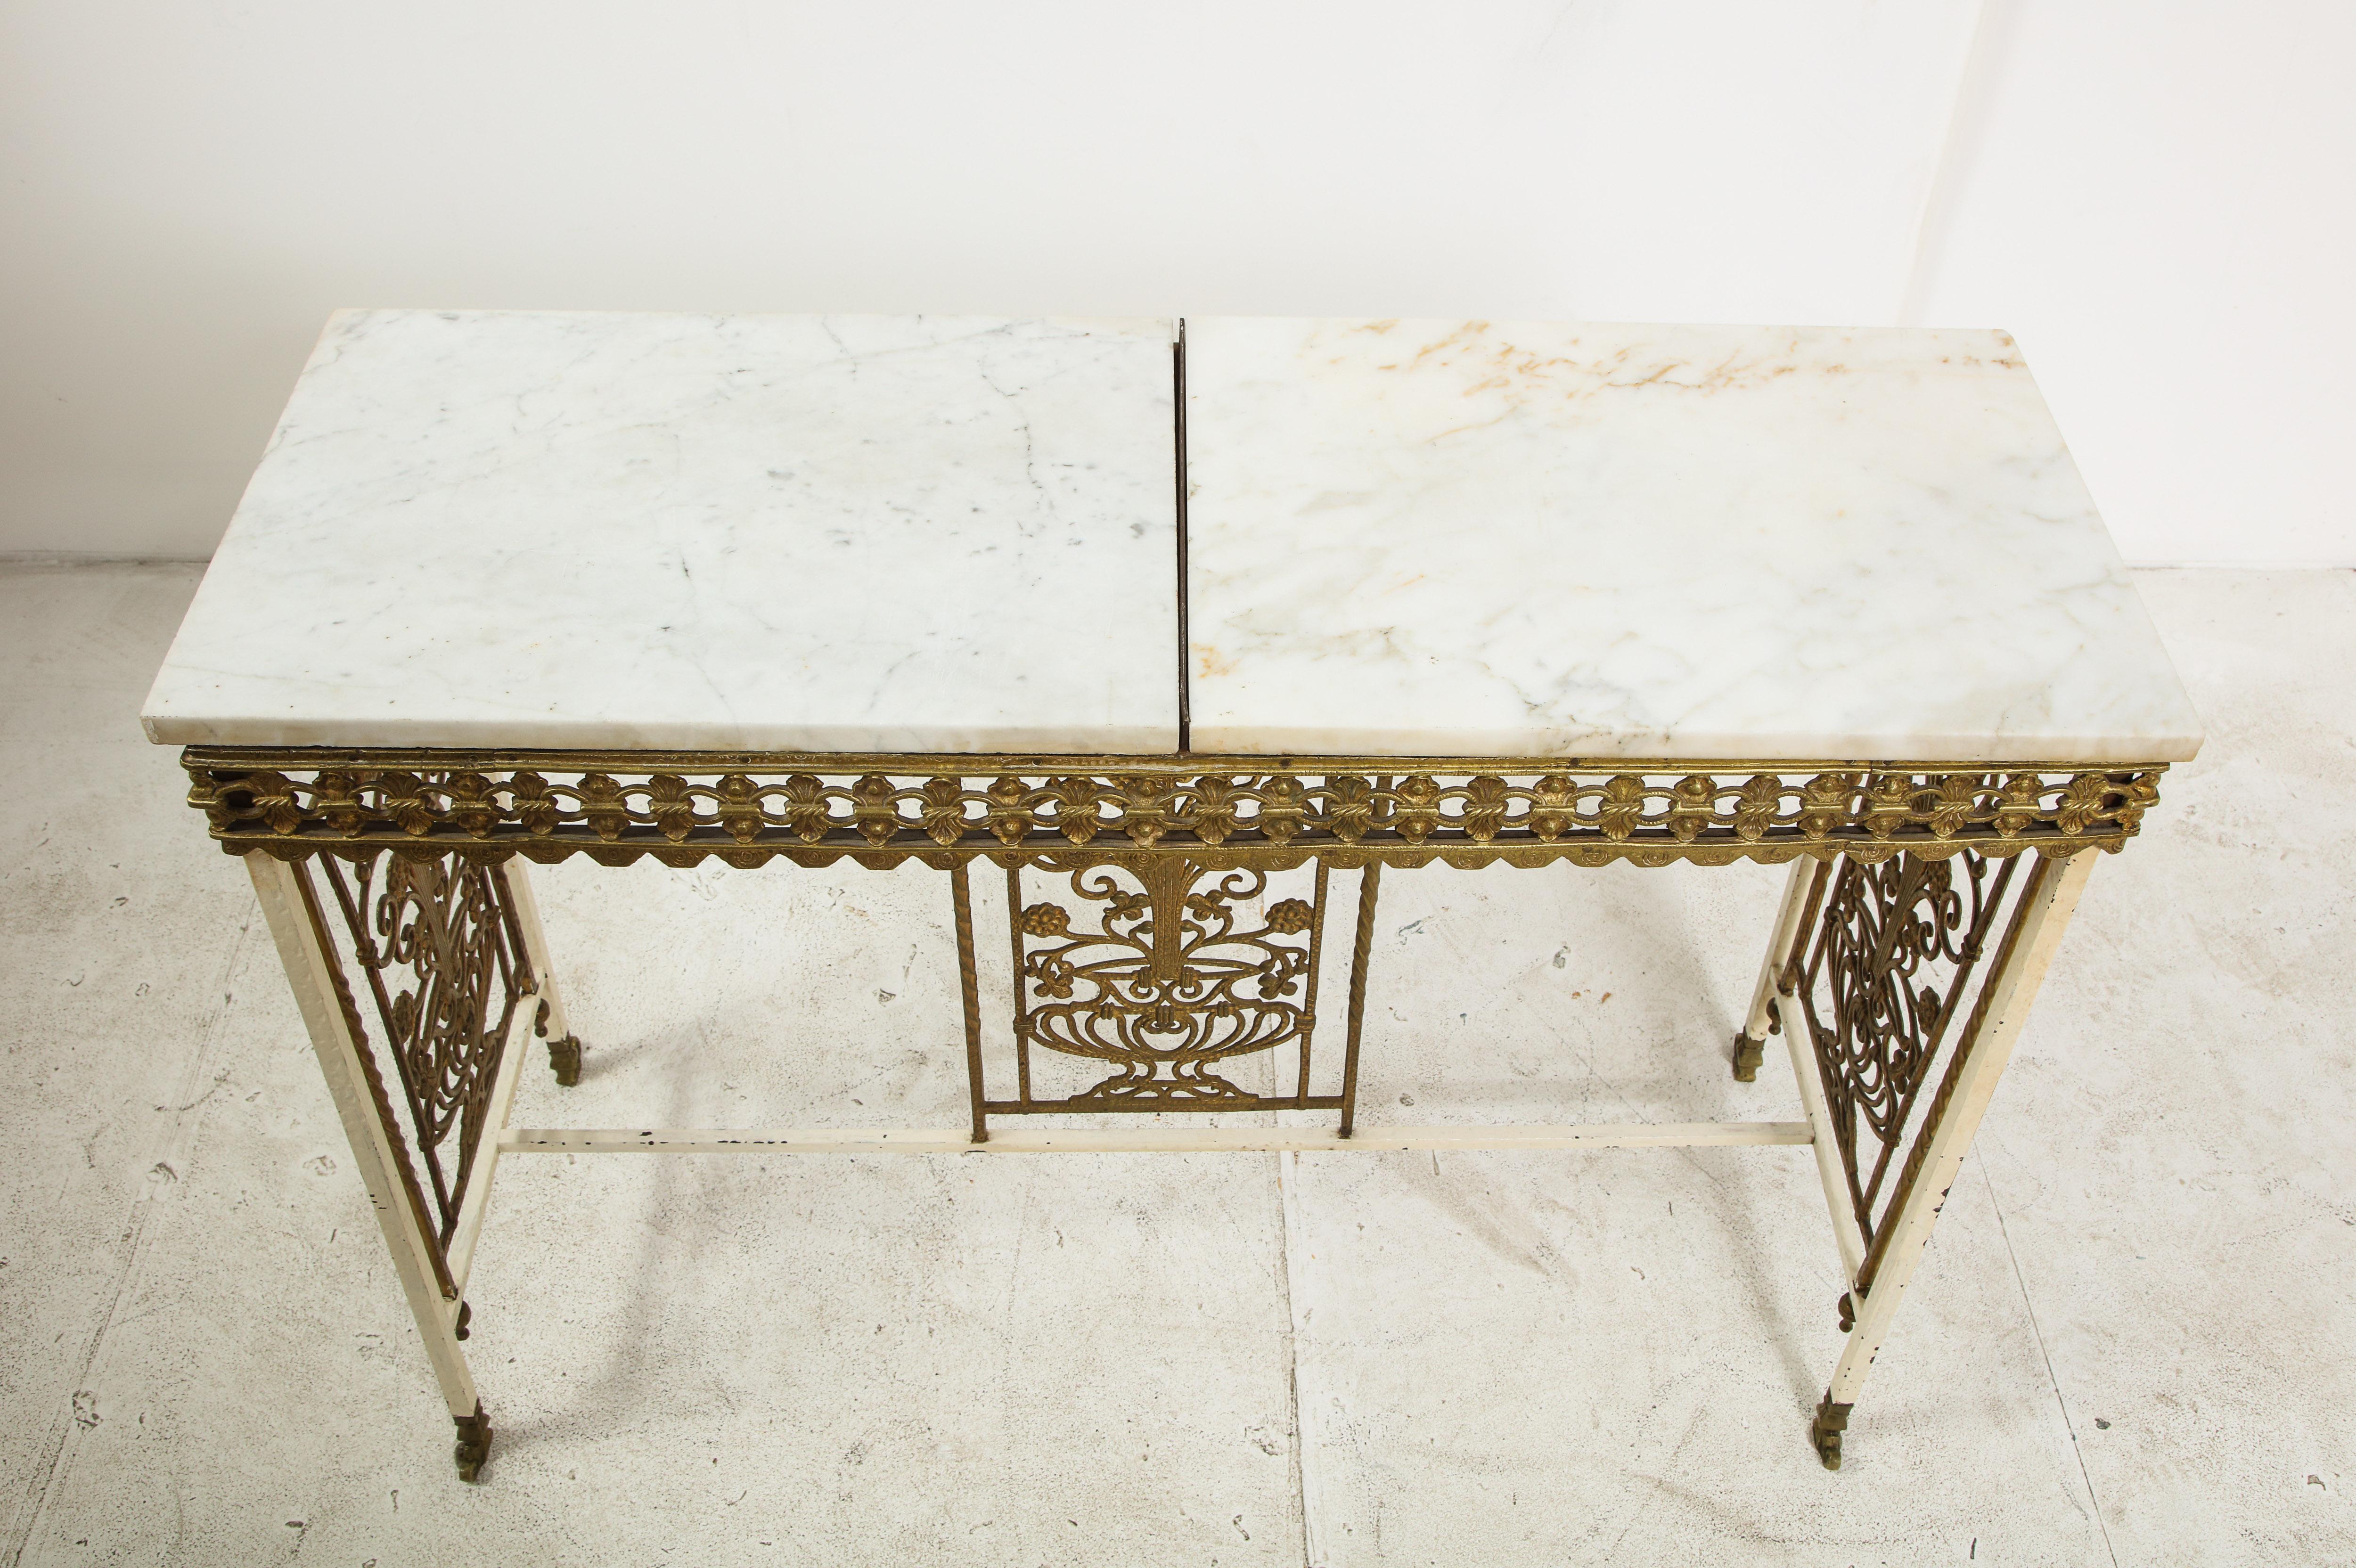 1930s French painted iron console with gilt details and two-piece marble top.